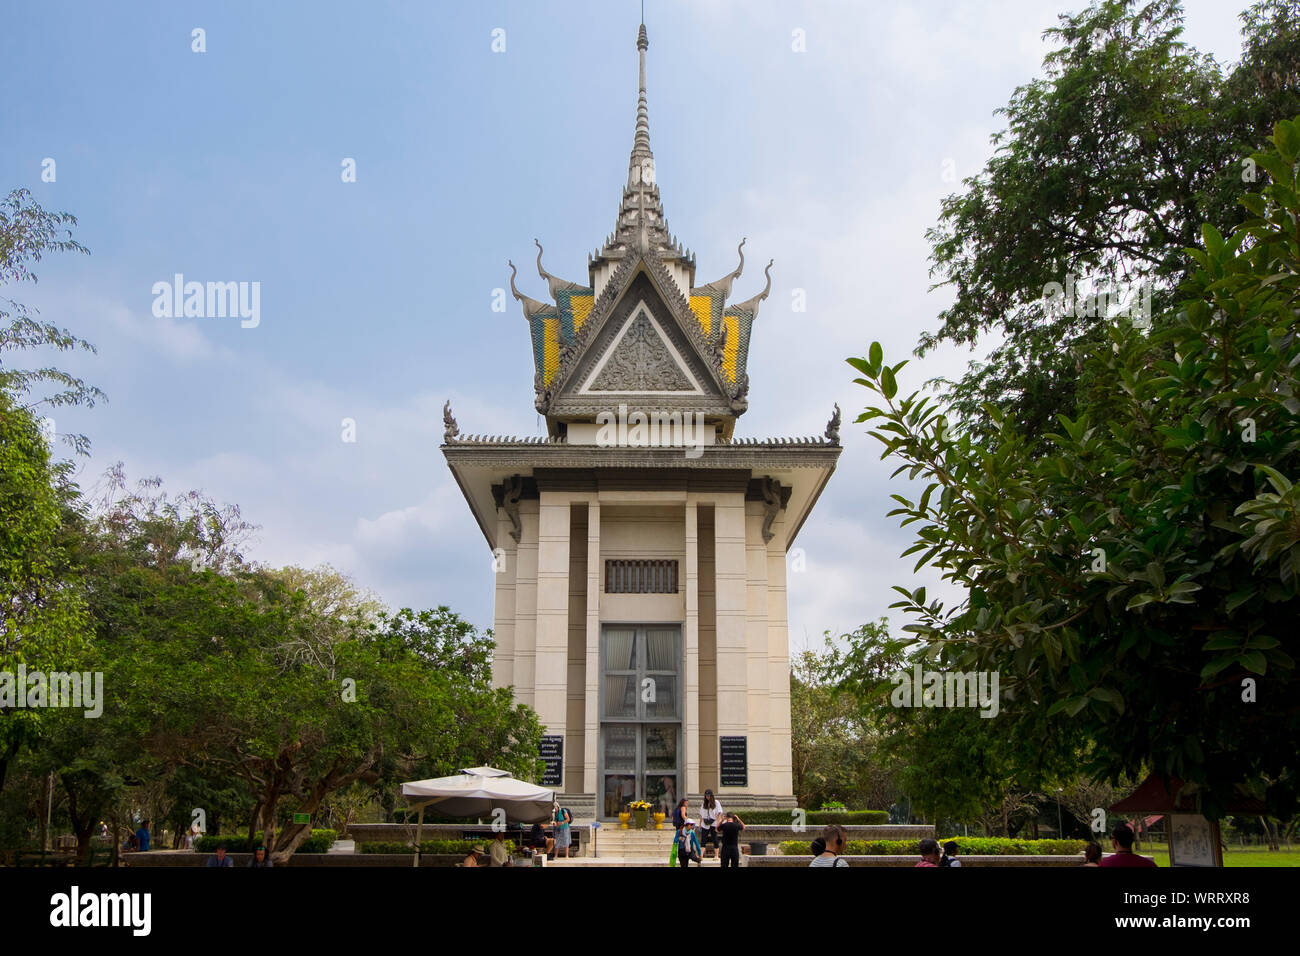 The main memorial Buddhist stupa made of glass and filled with victim's bones at the Choeung Ek Genocidal Center, outiside Phnom Penh, Cambodia. Stock Photo